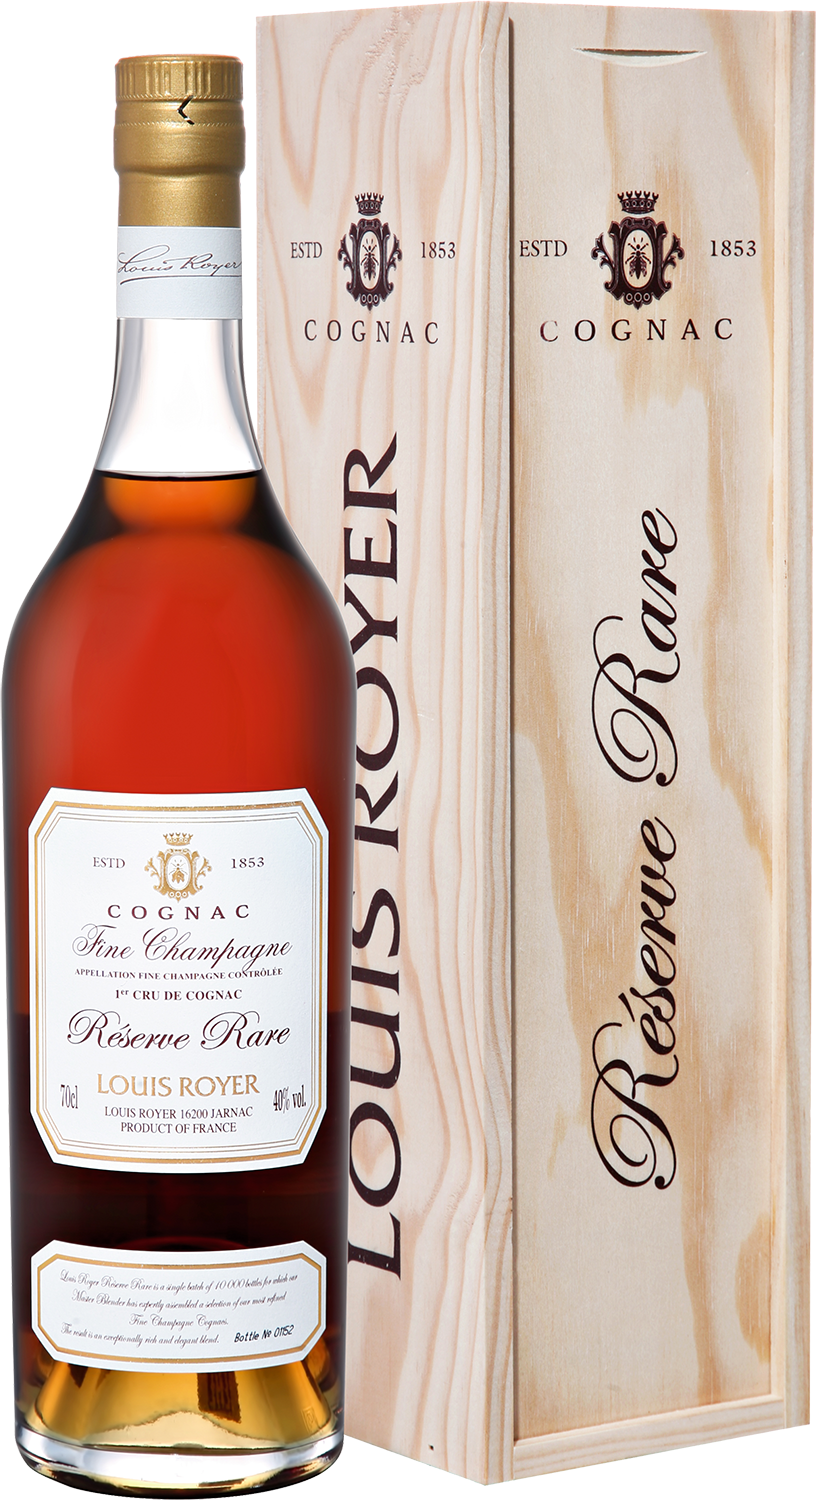 louis royer cognac grande champagne extra gift box Cognac Louis Royer Fine Champagne Reserve Rare (gift box)